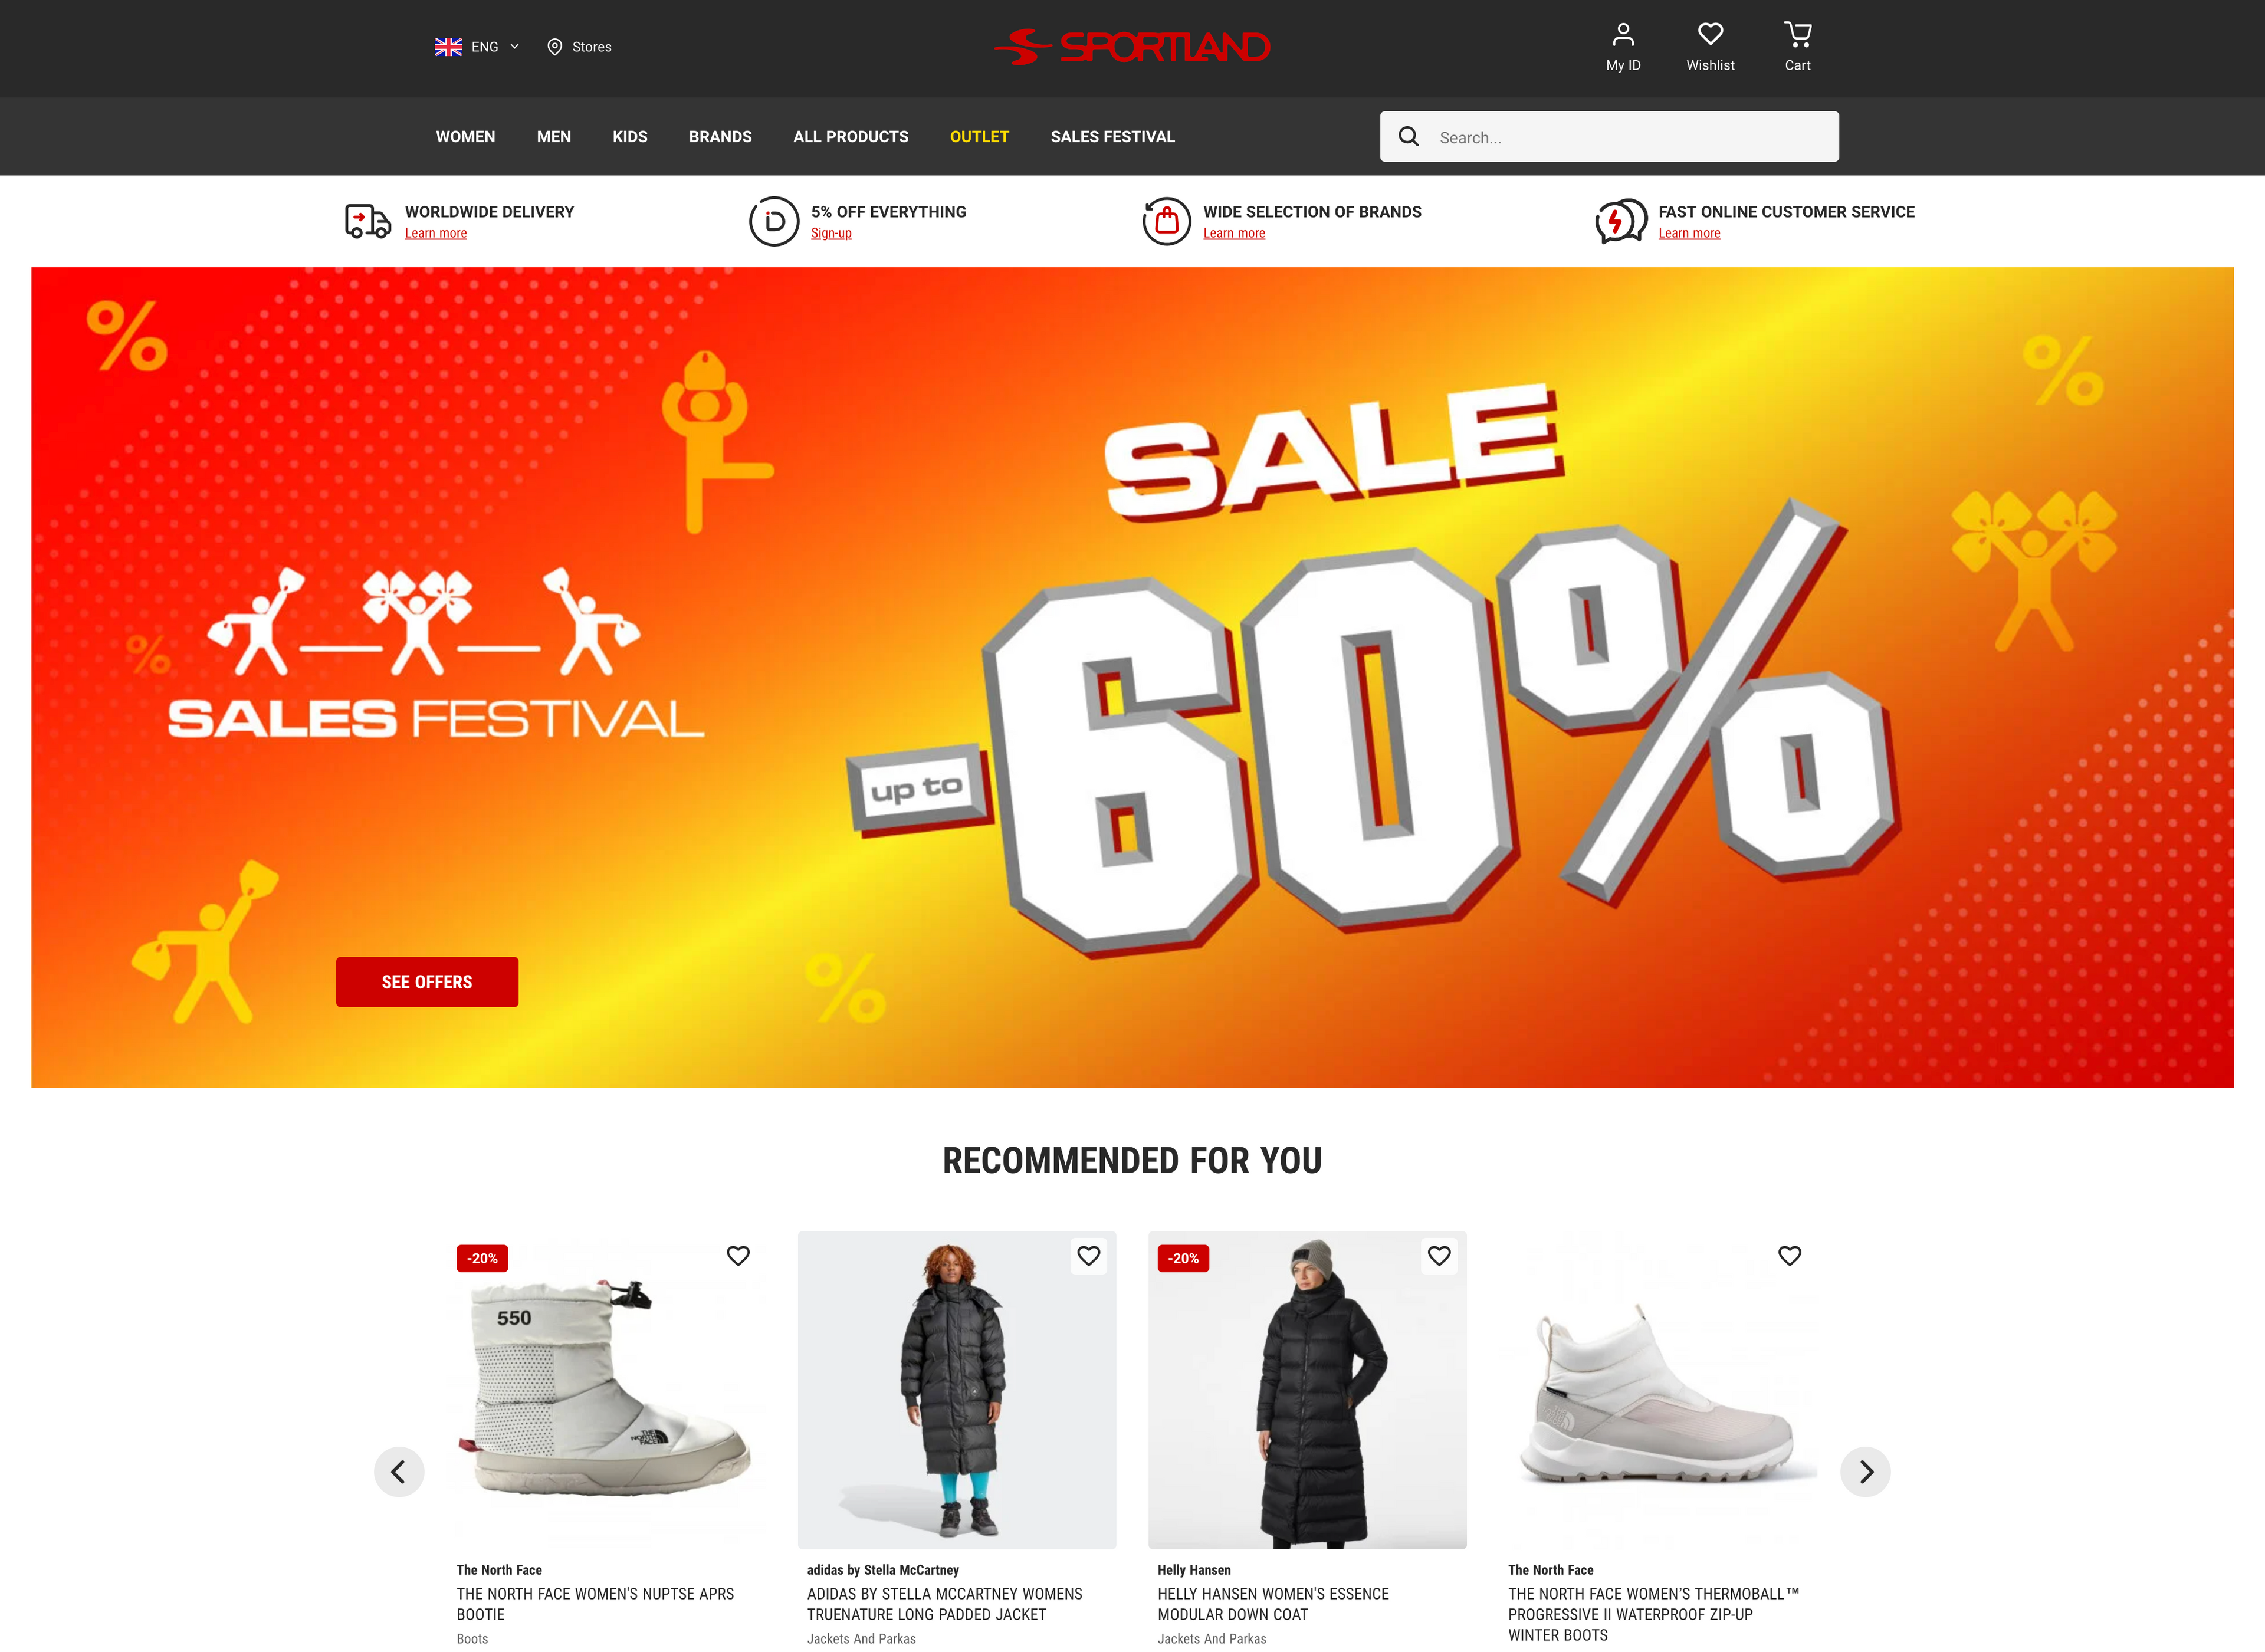 a sportsland website shows a sale of up to 60 %